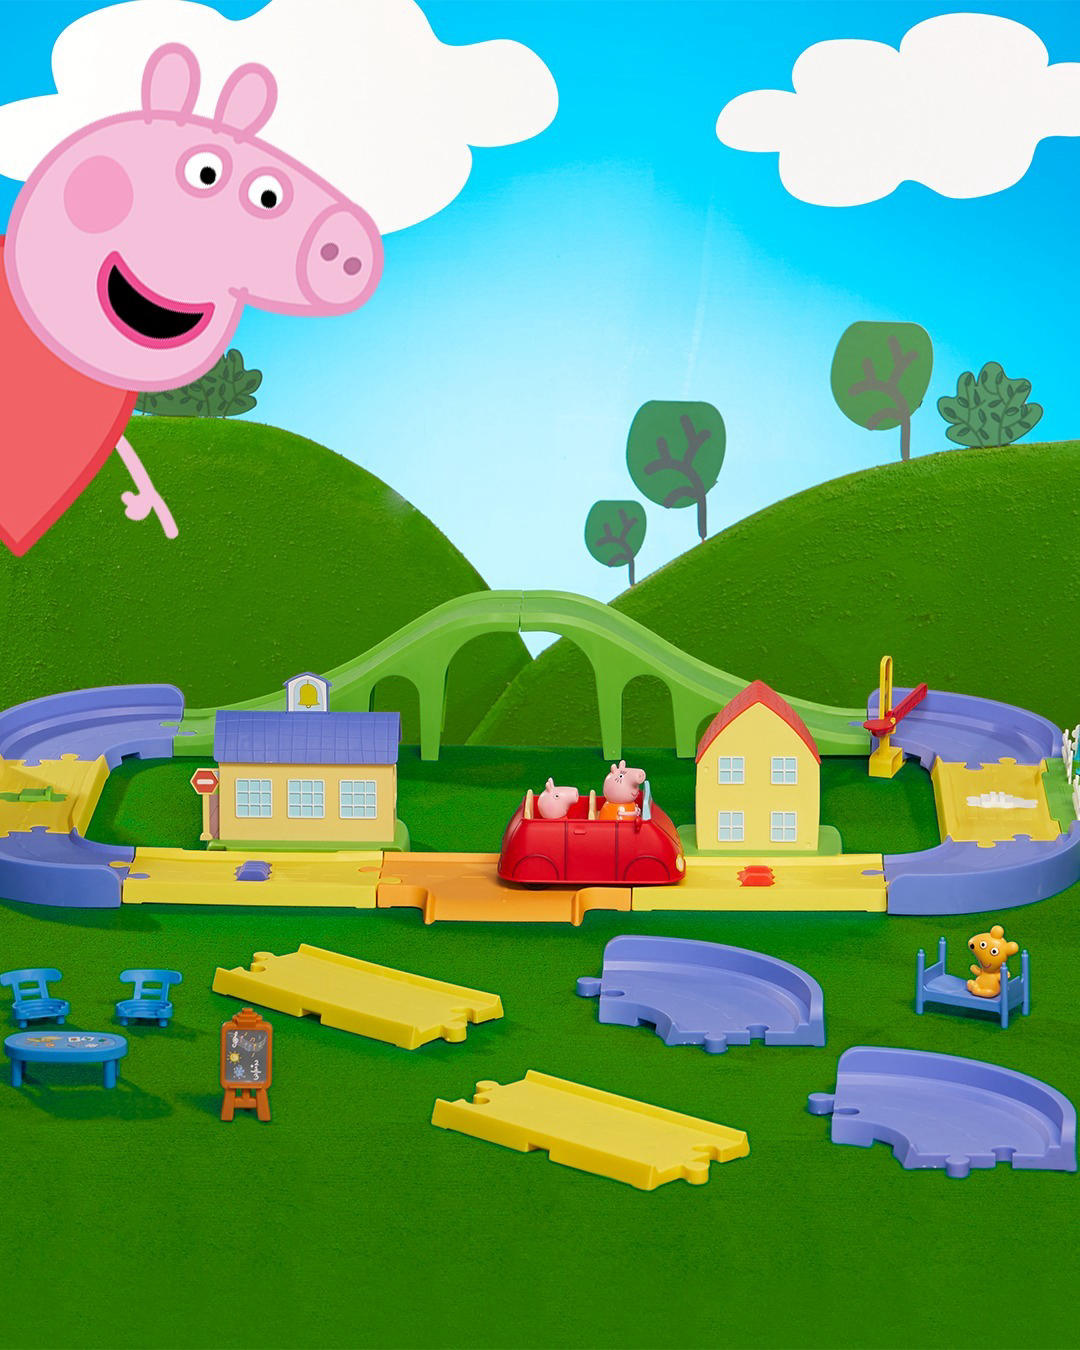 Peppa Pig - Imagine exploring where Peppa and her family live